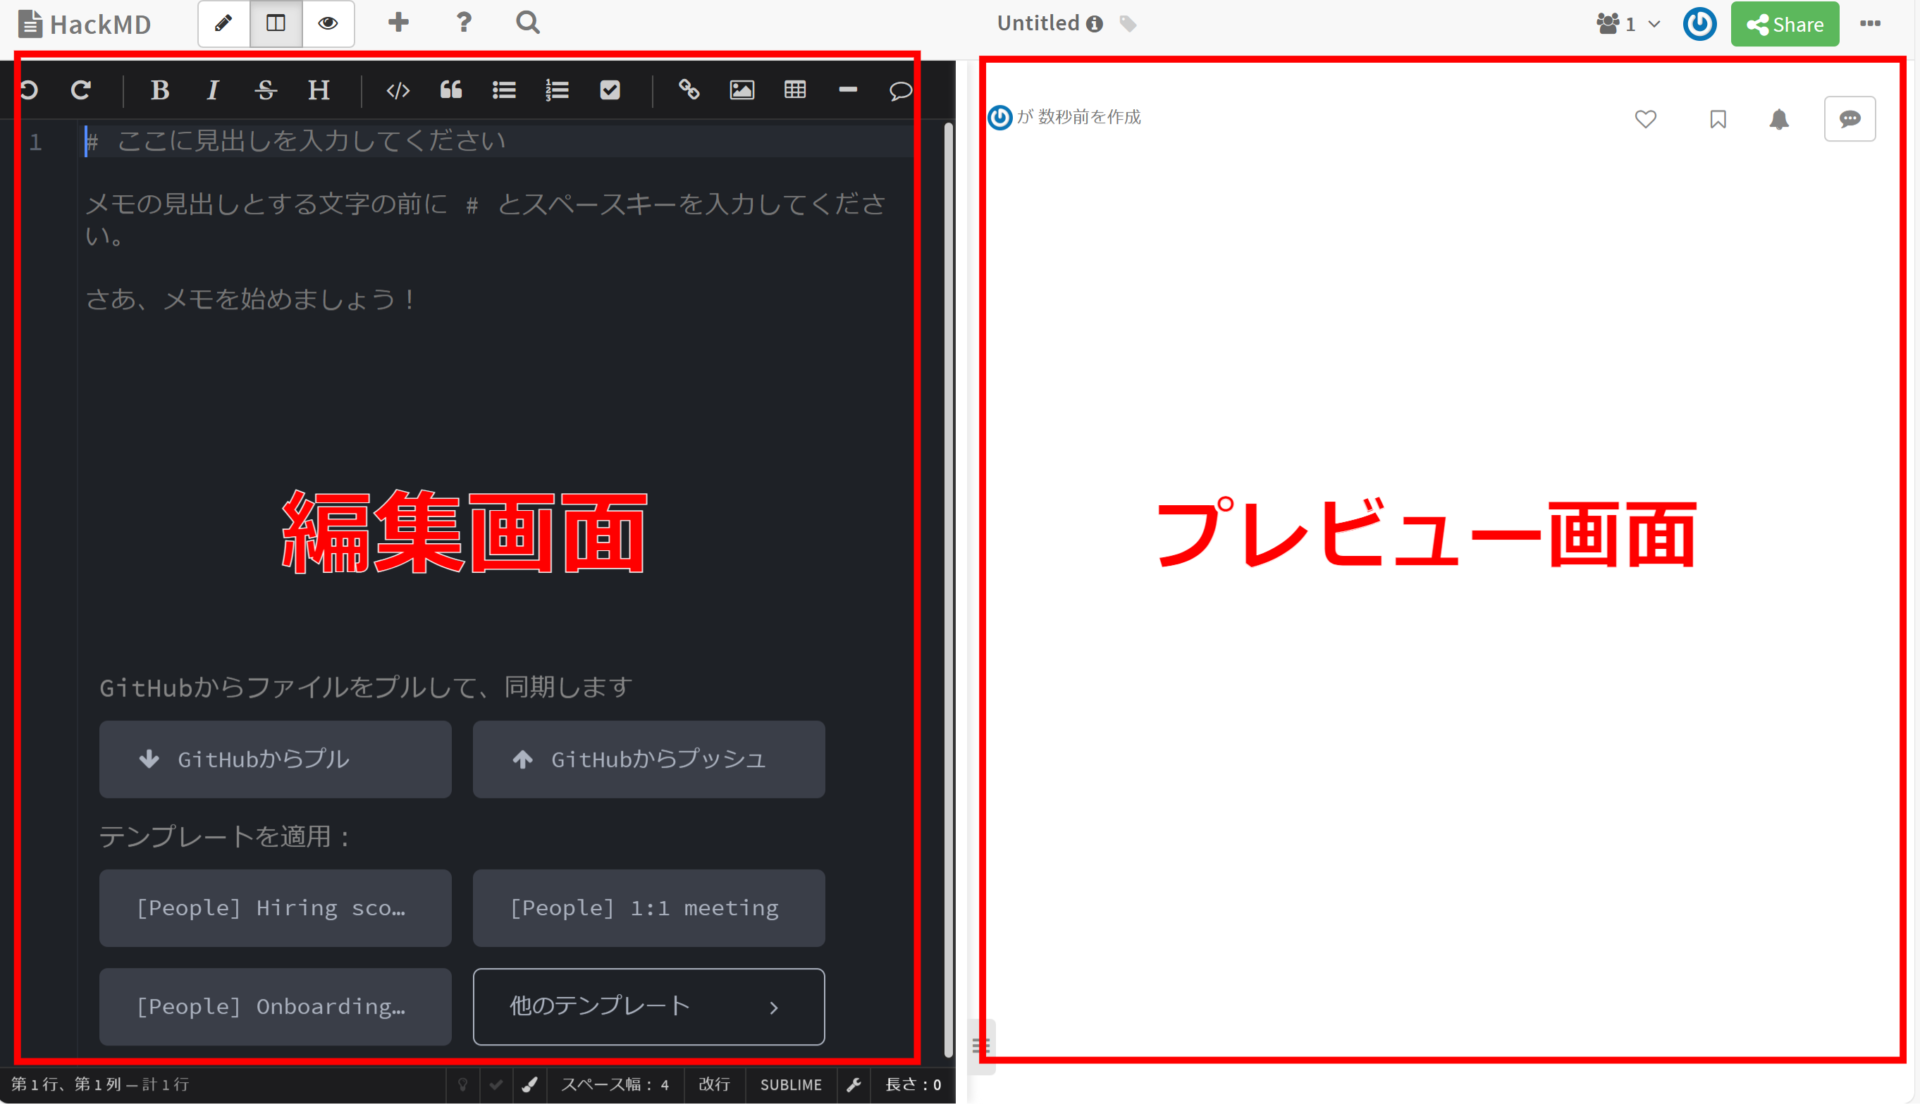 HackMDのドキュメント編集画面